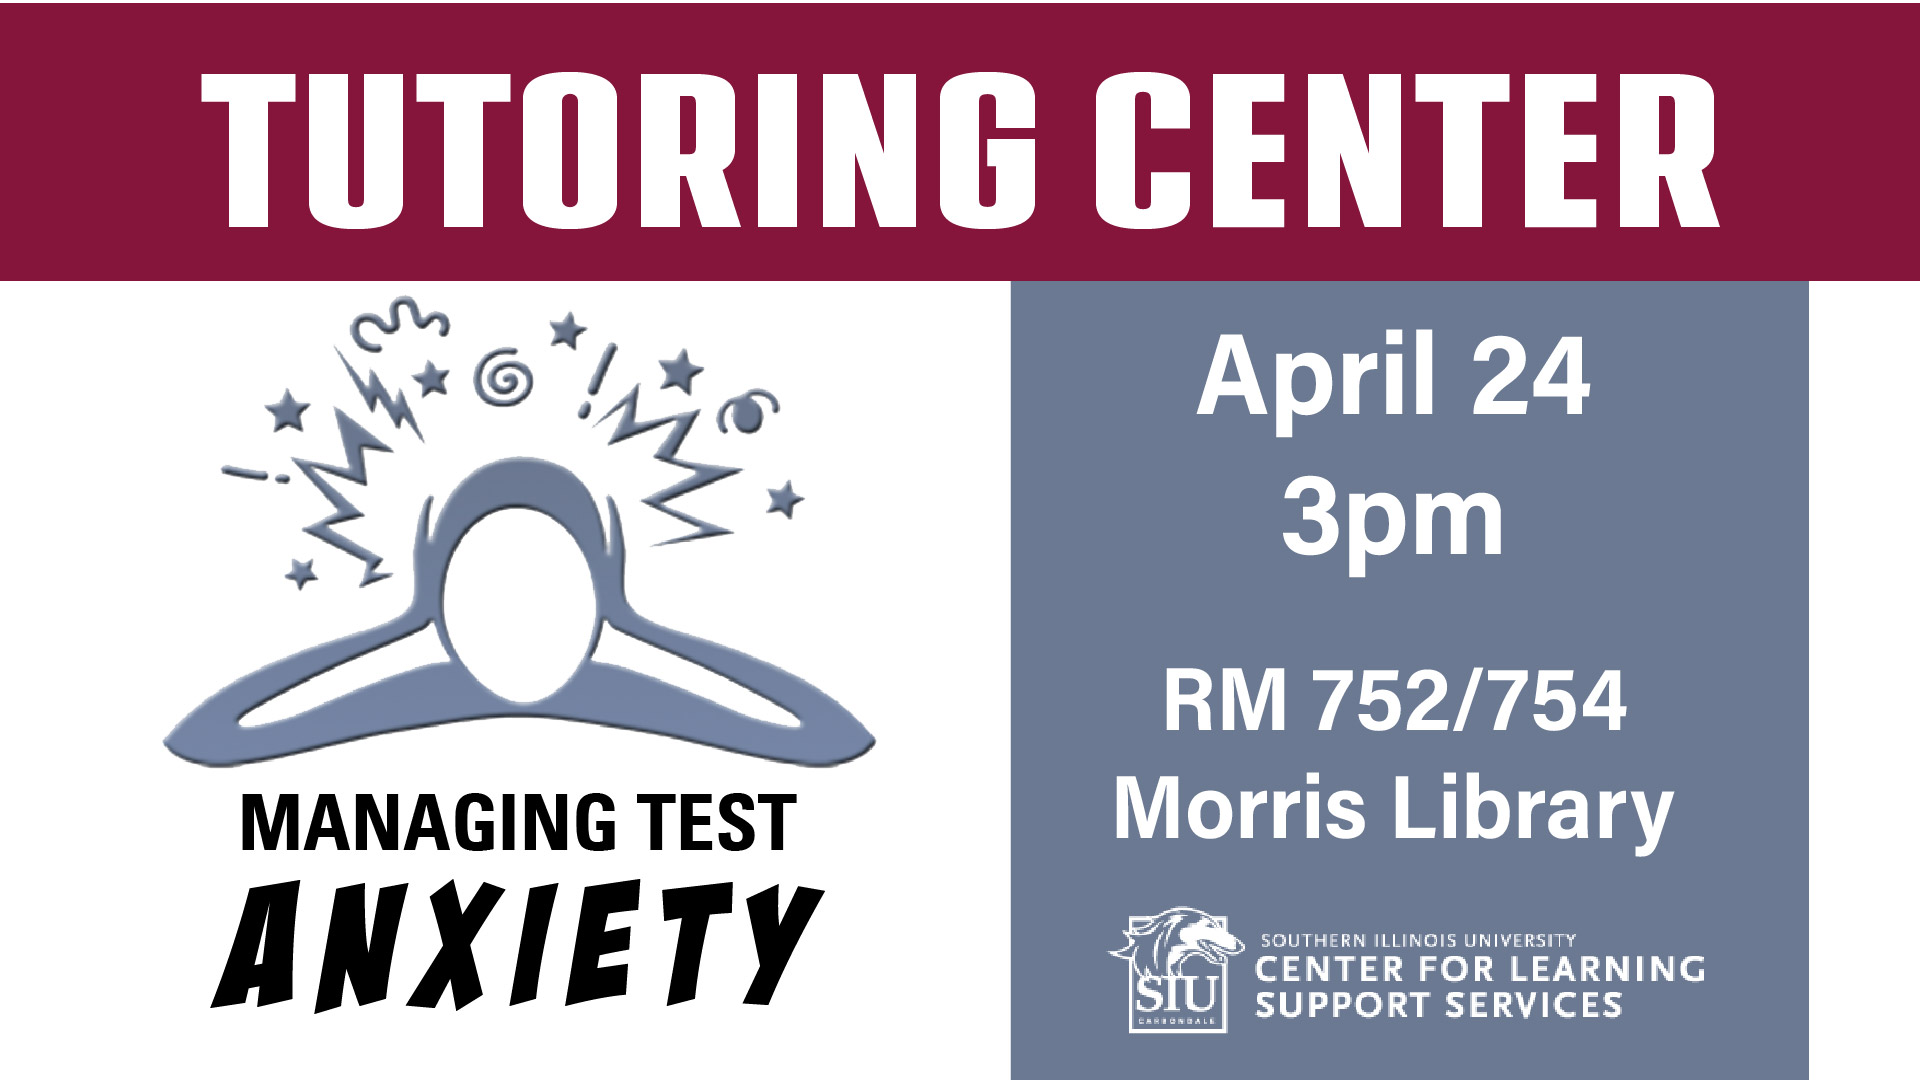 Learn how to manage test anxiety from the experts at the Tutoring Center on April 24 at 3pm in Morris Library Room 752/754.